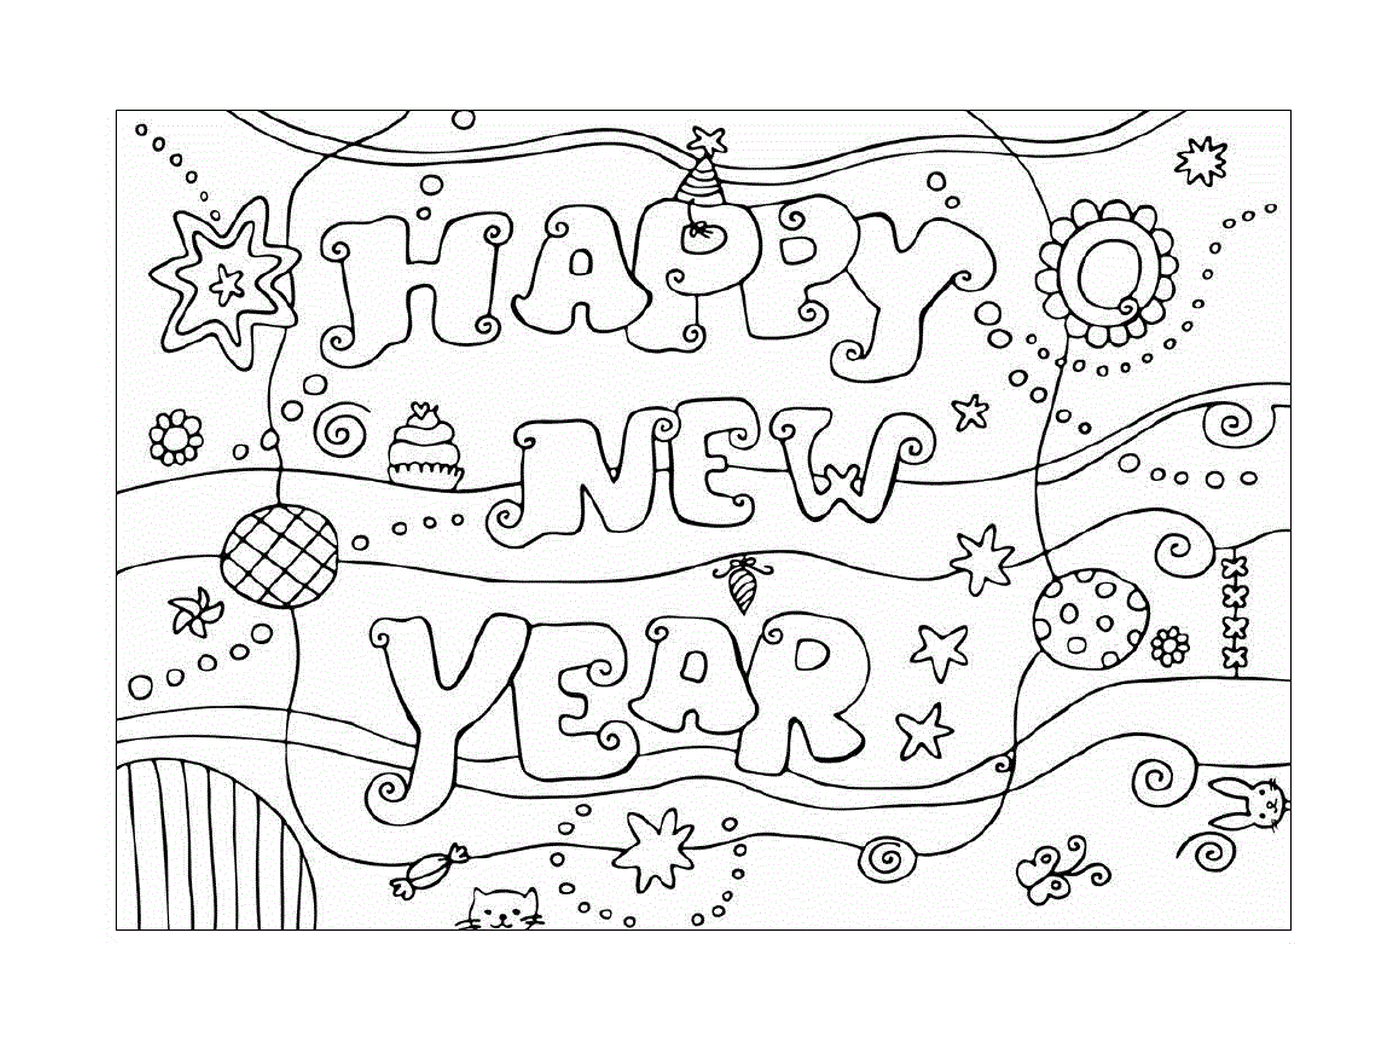  Design of coloring for children for the good year 